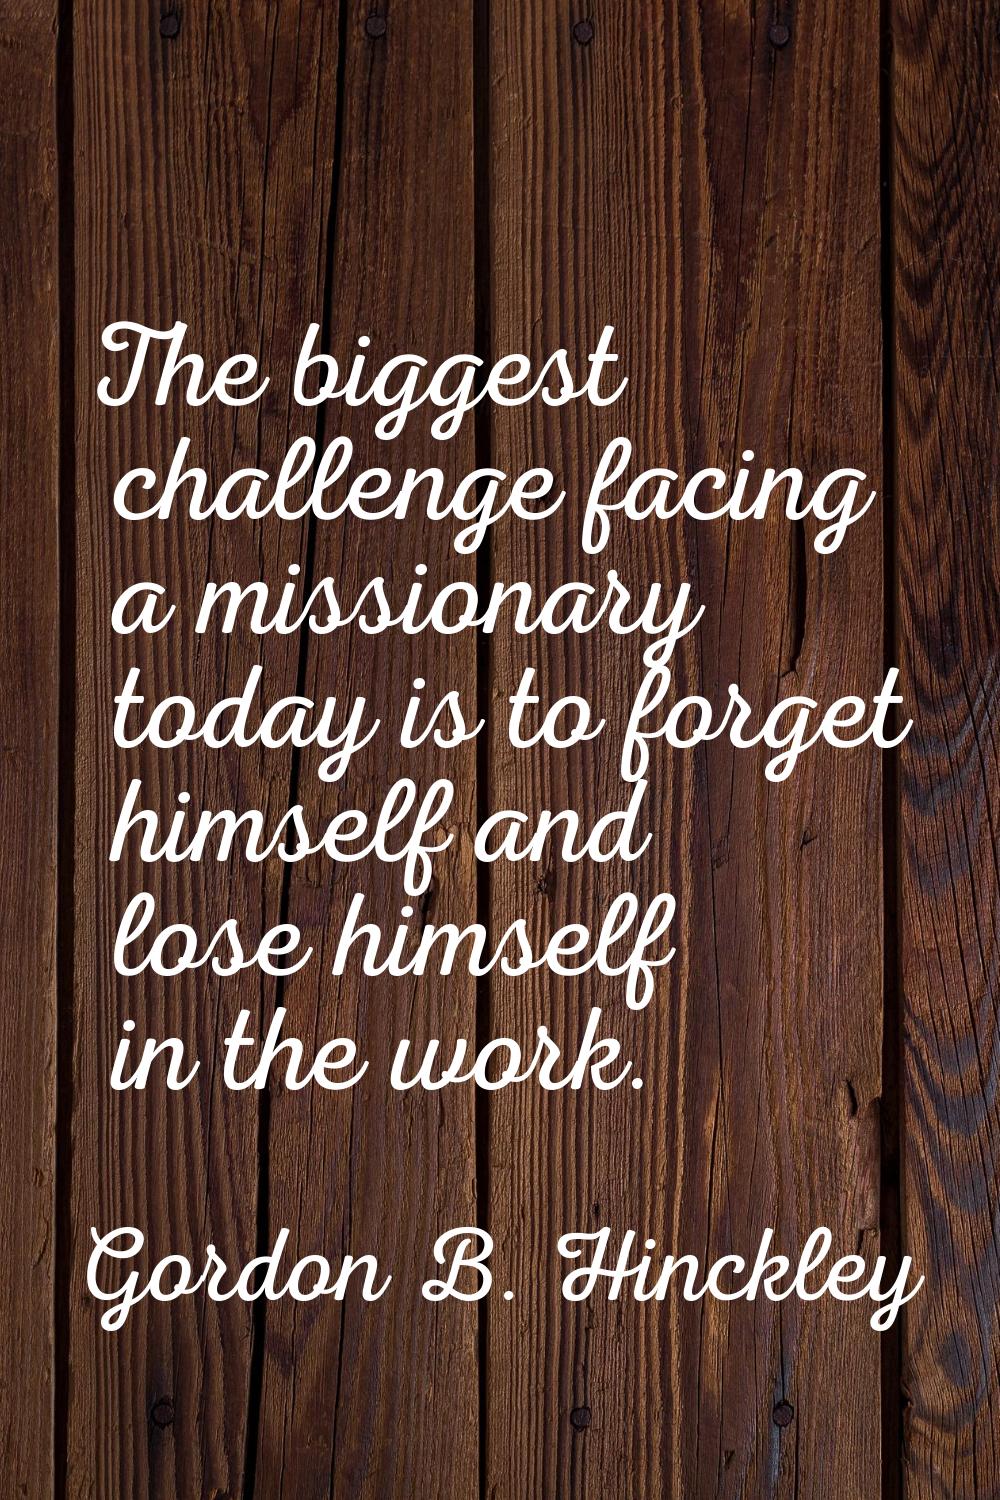 The biggest challenge facing a missionary today is to forget himself and lose himself in the work.